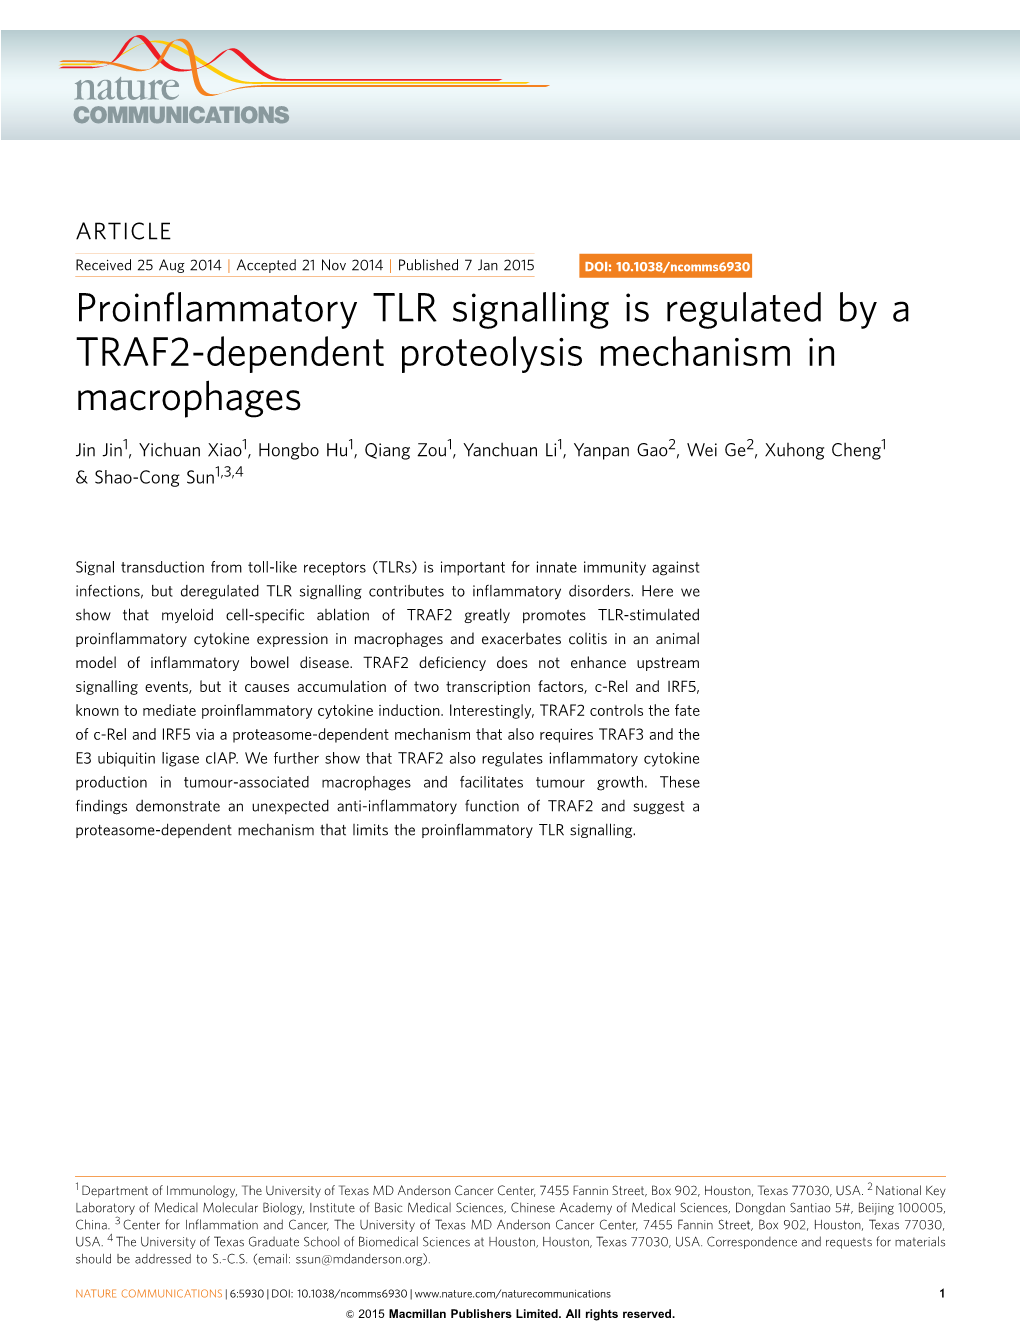 Proinflammatory TLR Signalling Is Regulated by a TRAF2-Dependent